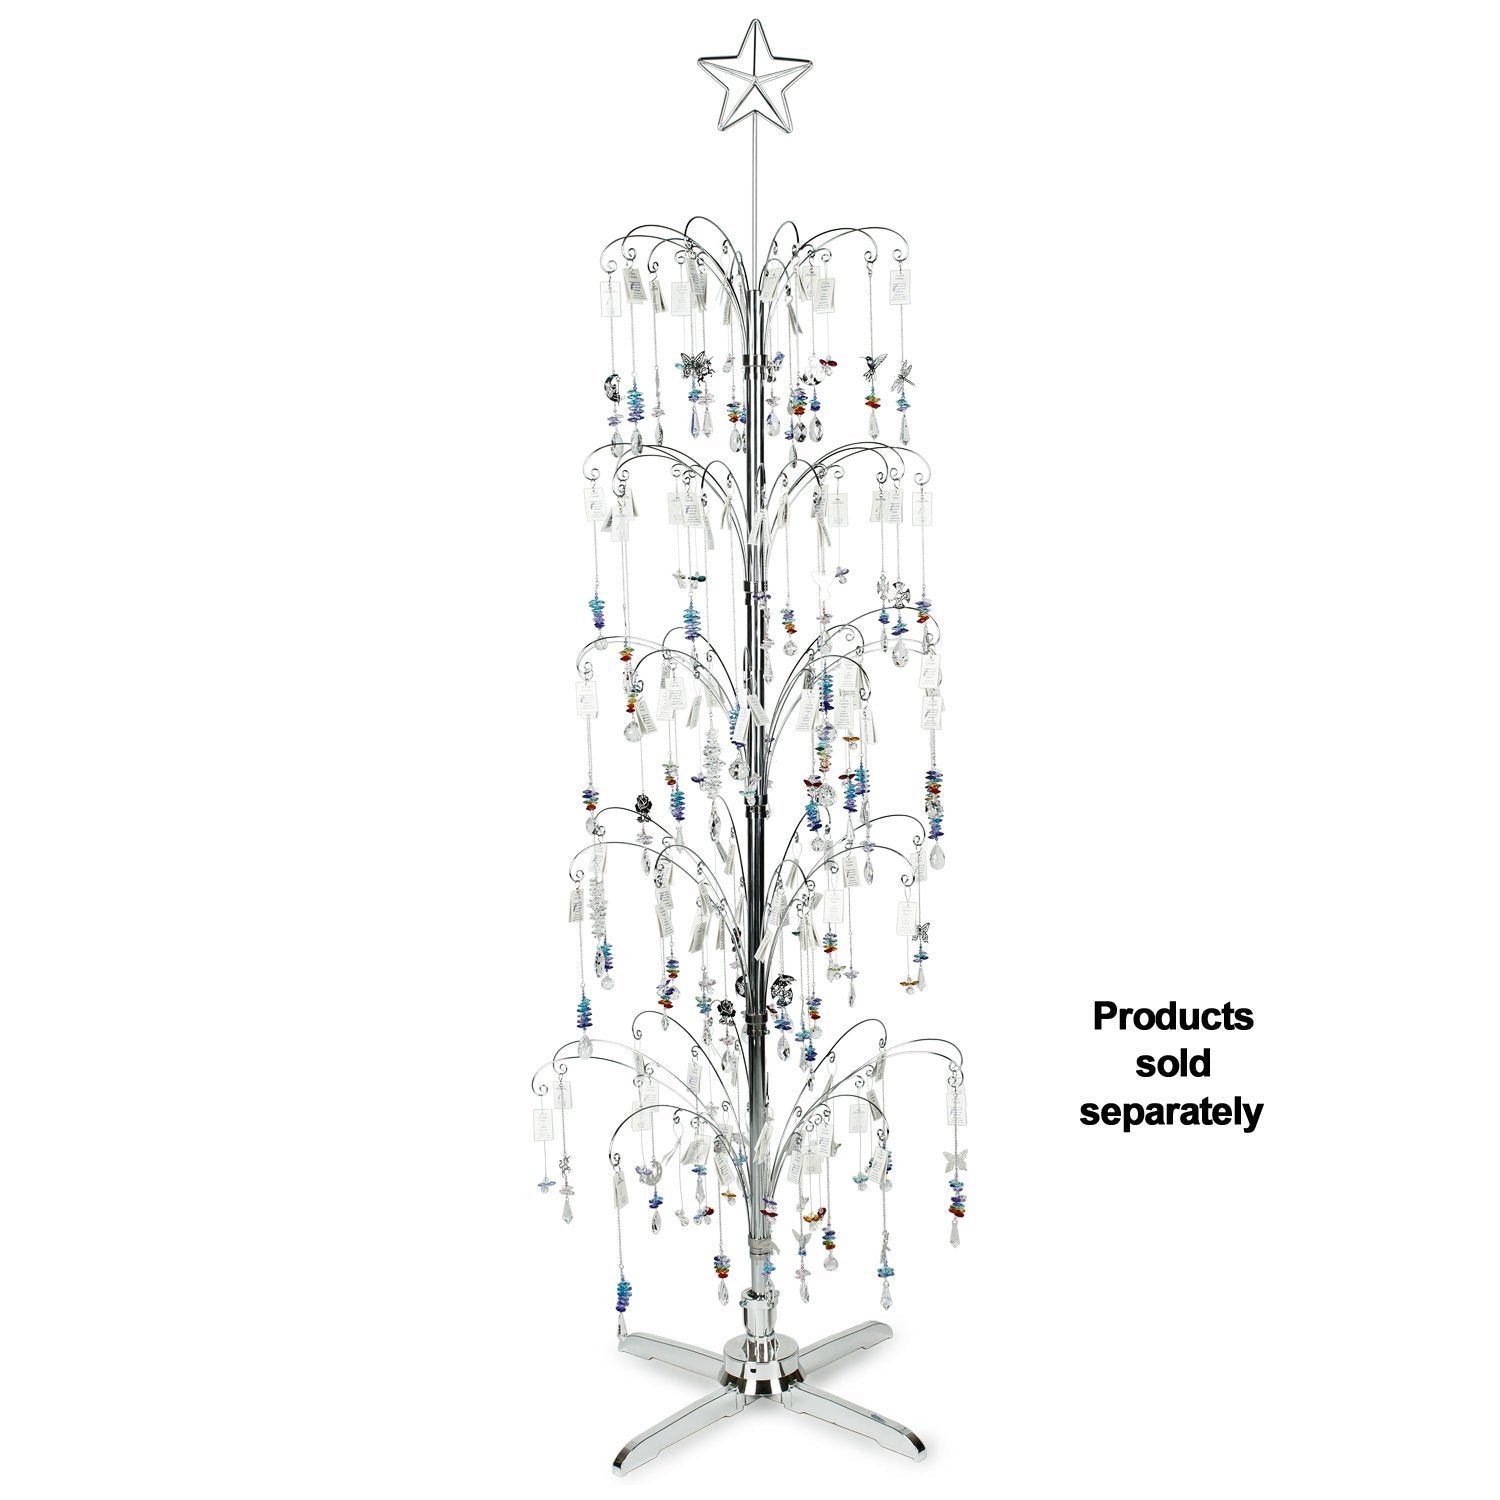 Fiddlehead Rotating Floor Tree image with crystal suncatchers (sold separately)